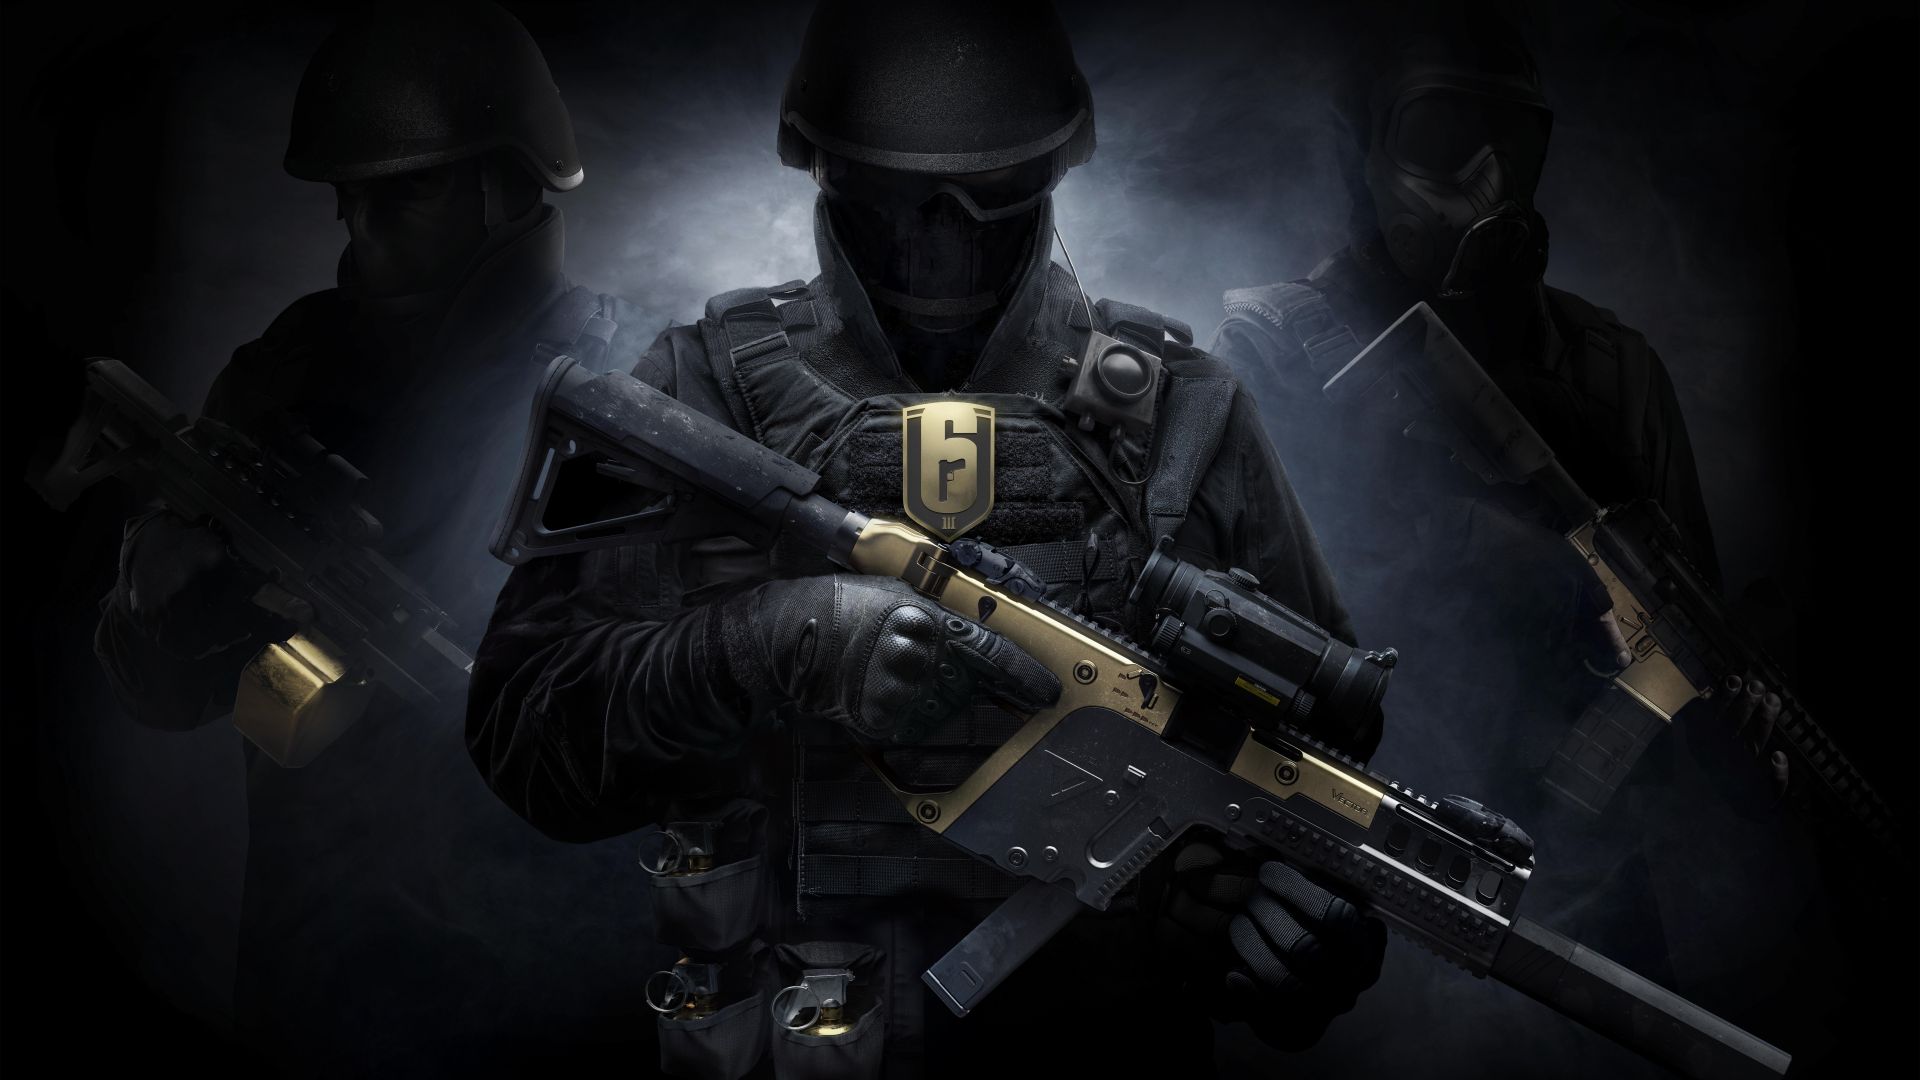 Desktop Wallpaper Soldiers, Tom Clancy's Rainbow Six Siege, Video Game, 8k,  Hd Image, Picture, Background, 49f2cb